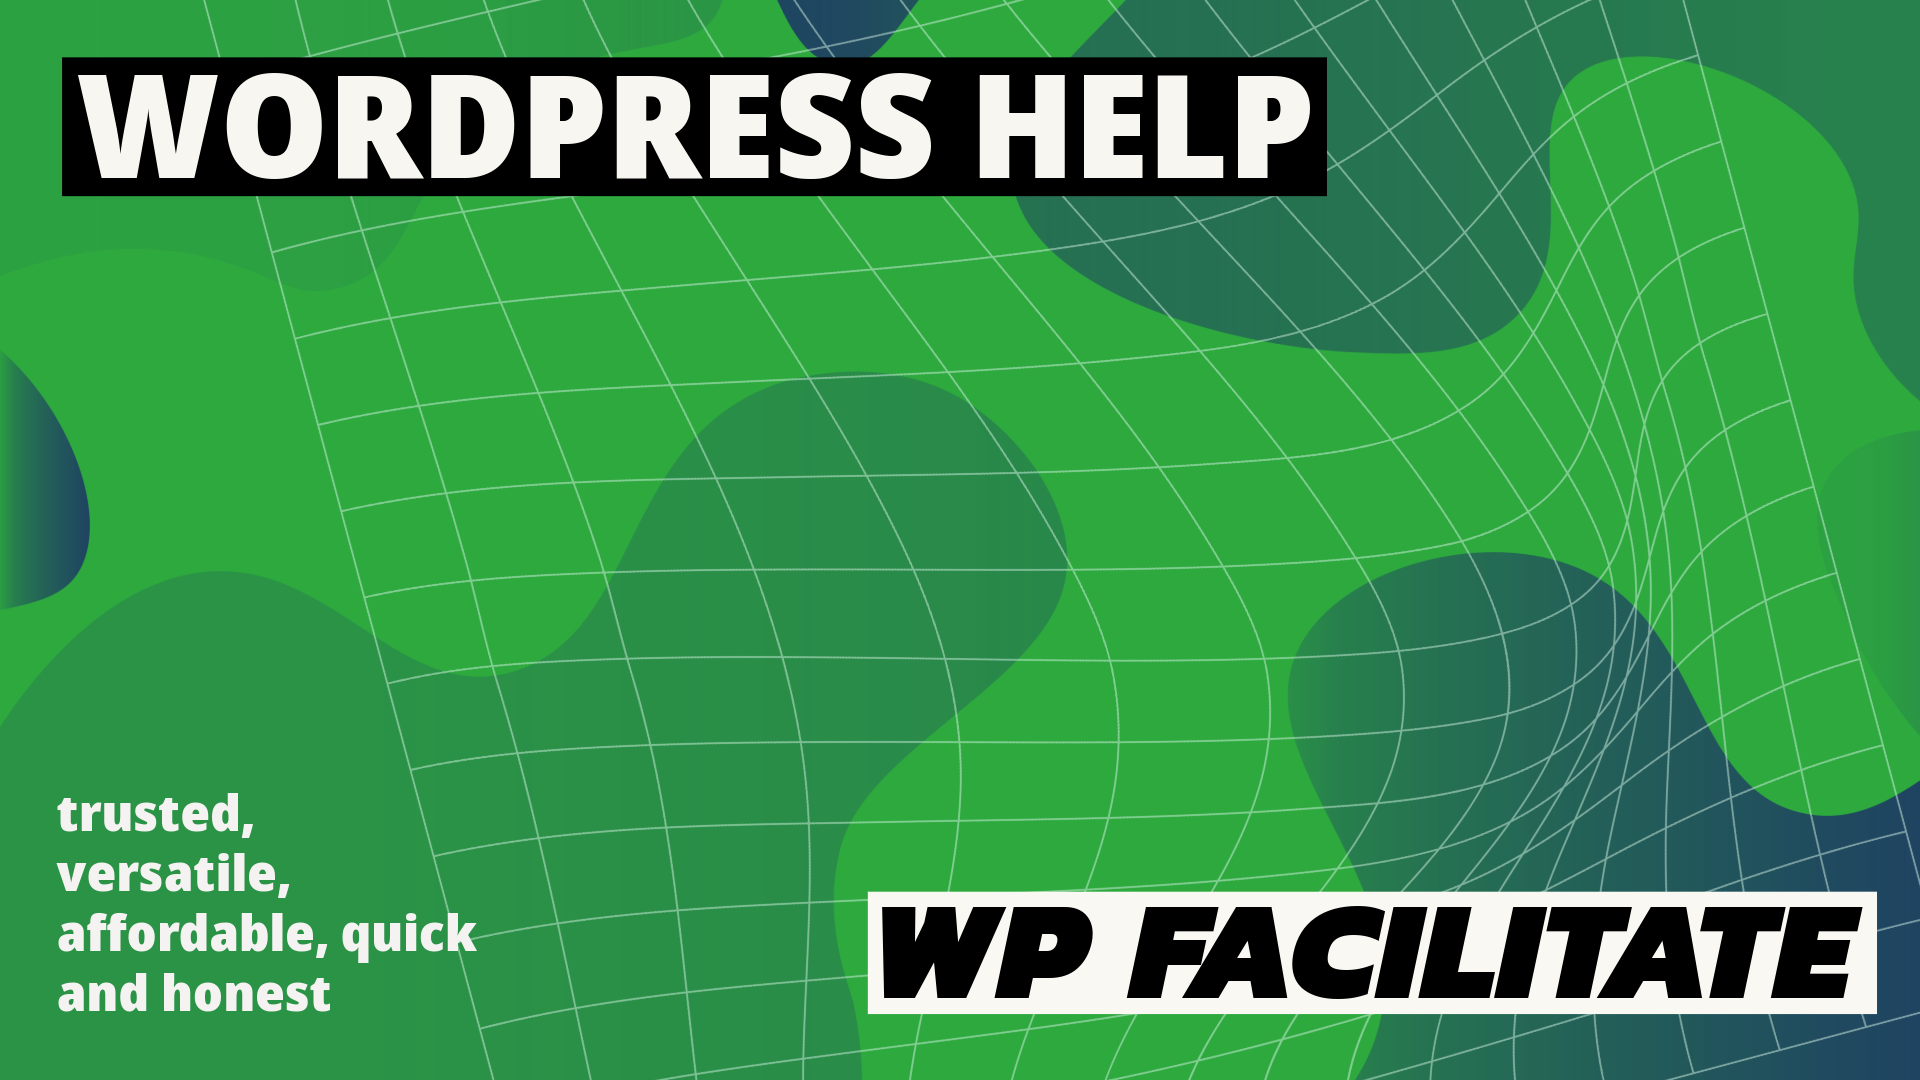 WordPress Help: A trusted, versatile and passionate WordPress professional is ready to help you now. Let's go!